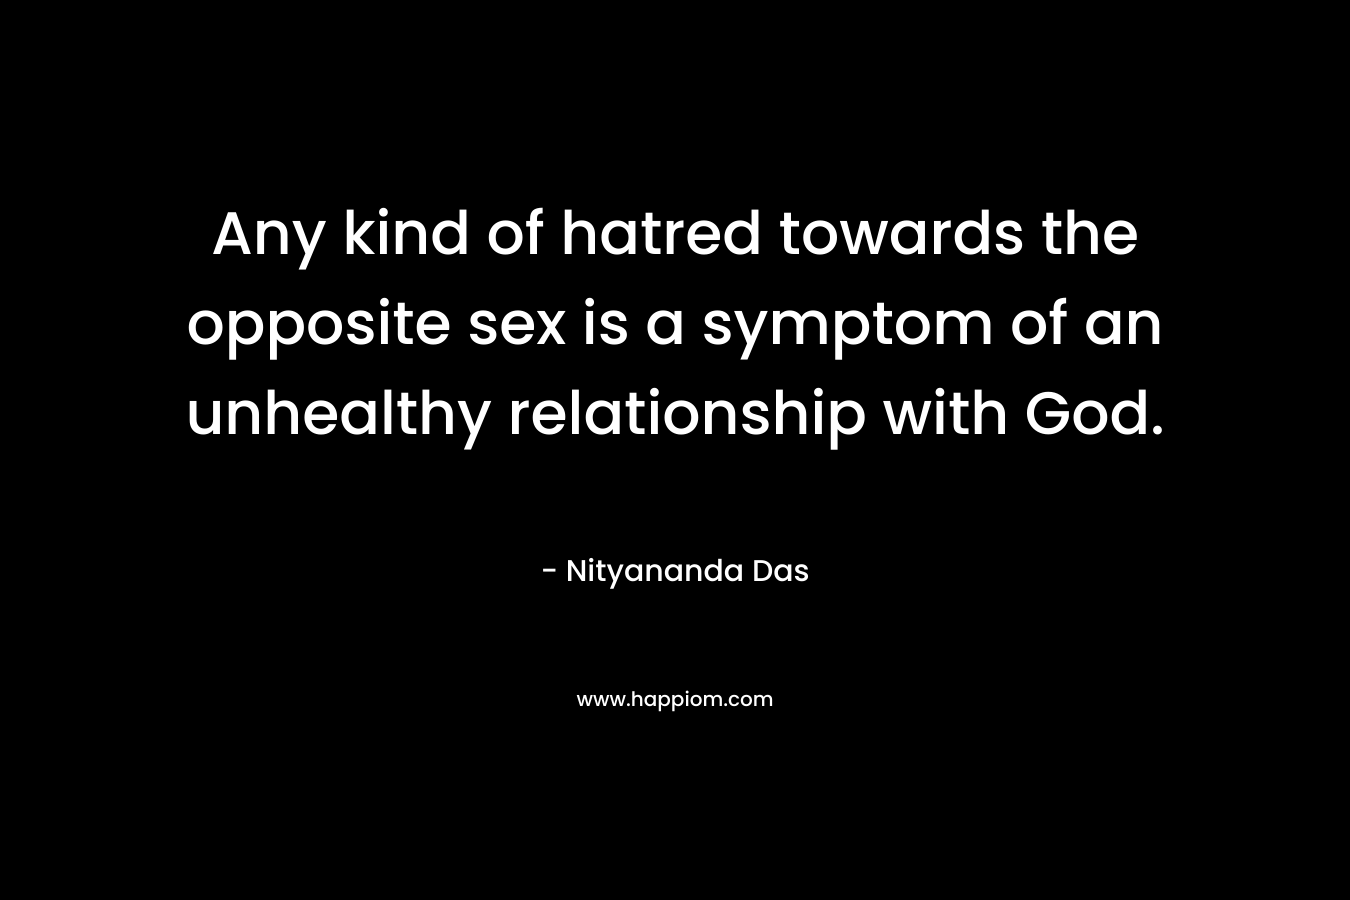 Any kind of hatred towards the opposite sex is a symptom of an unhealthy relationship with God. – Nityananda Das